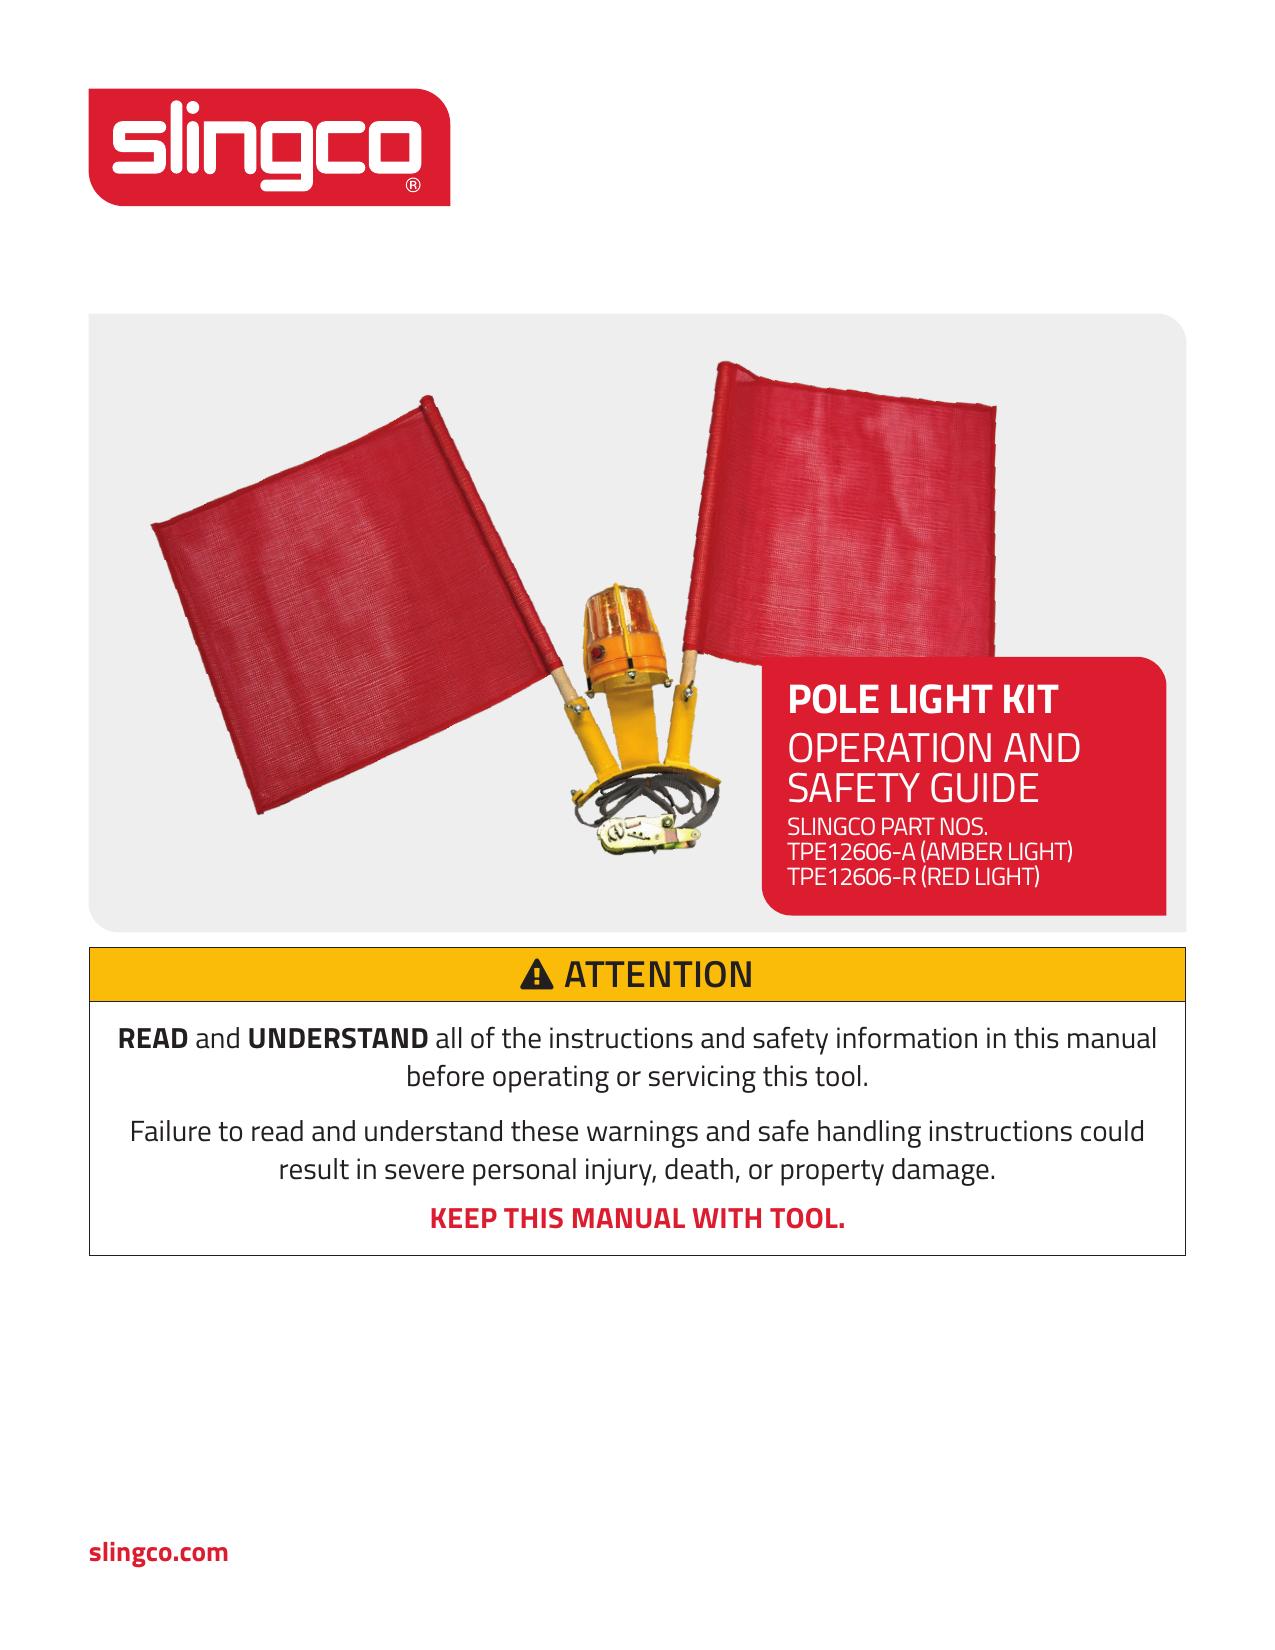 Pole Light Kit Operation and Safety Guide